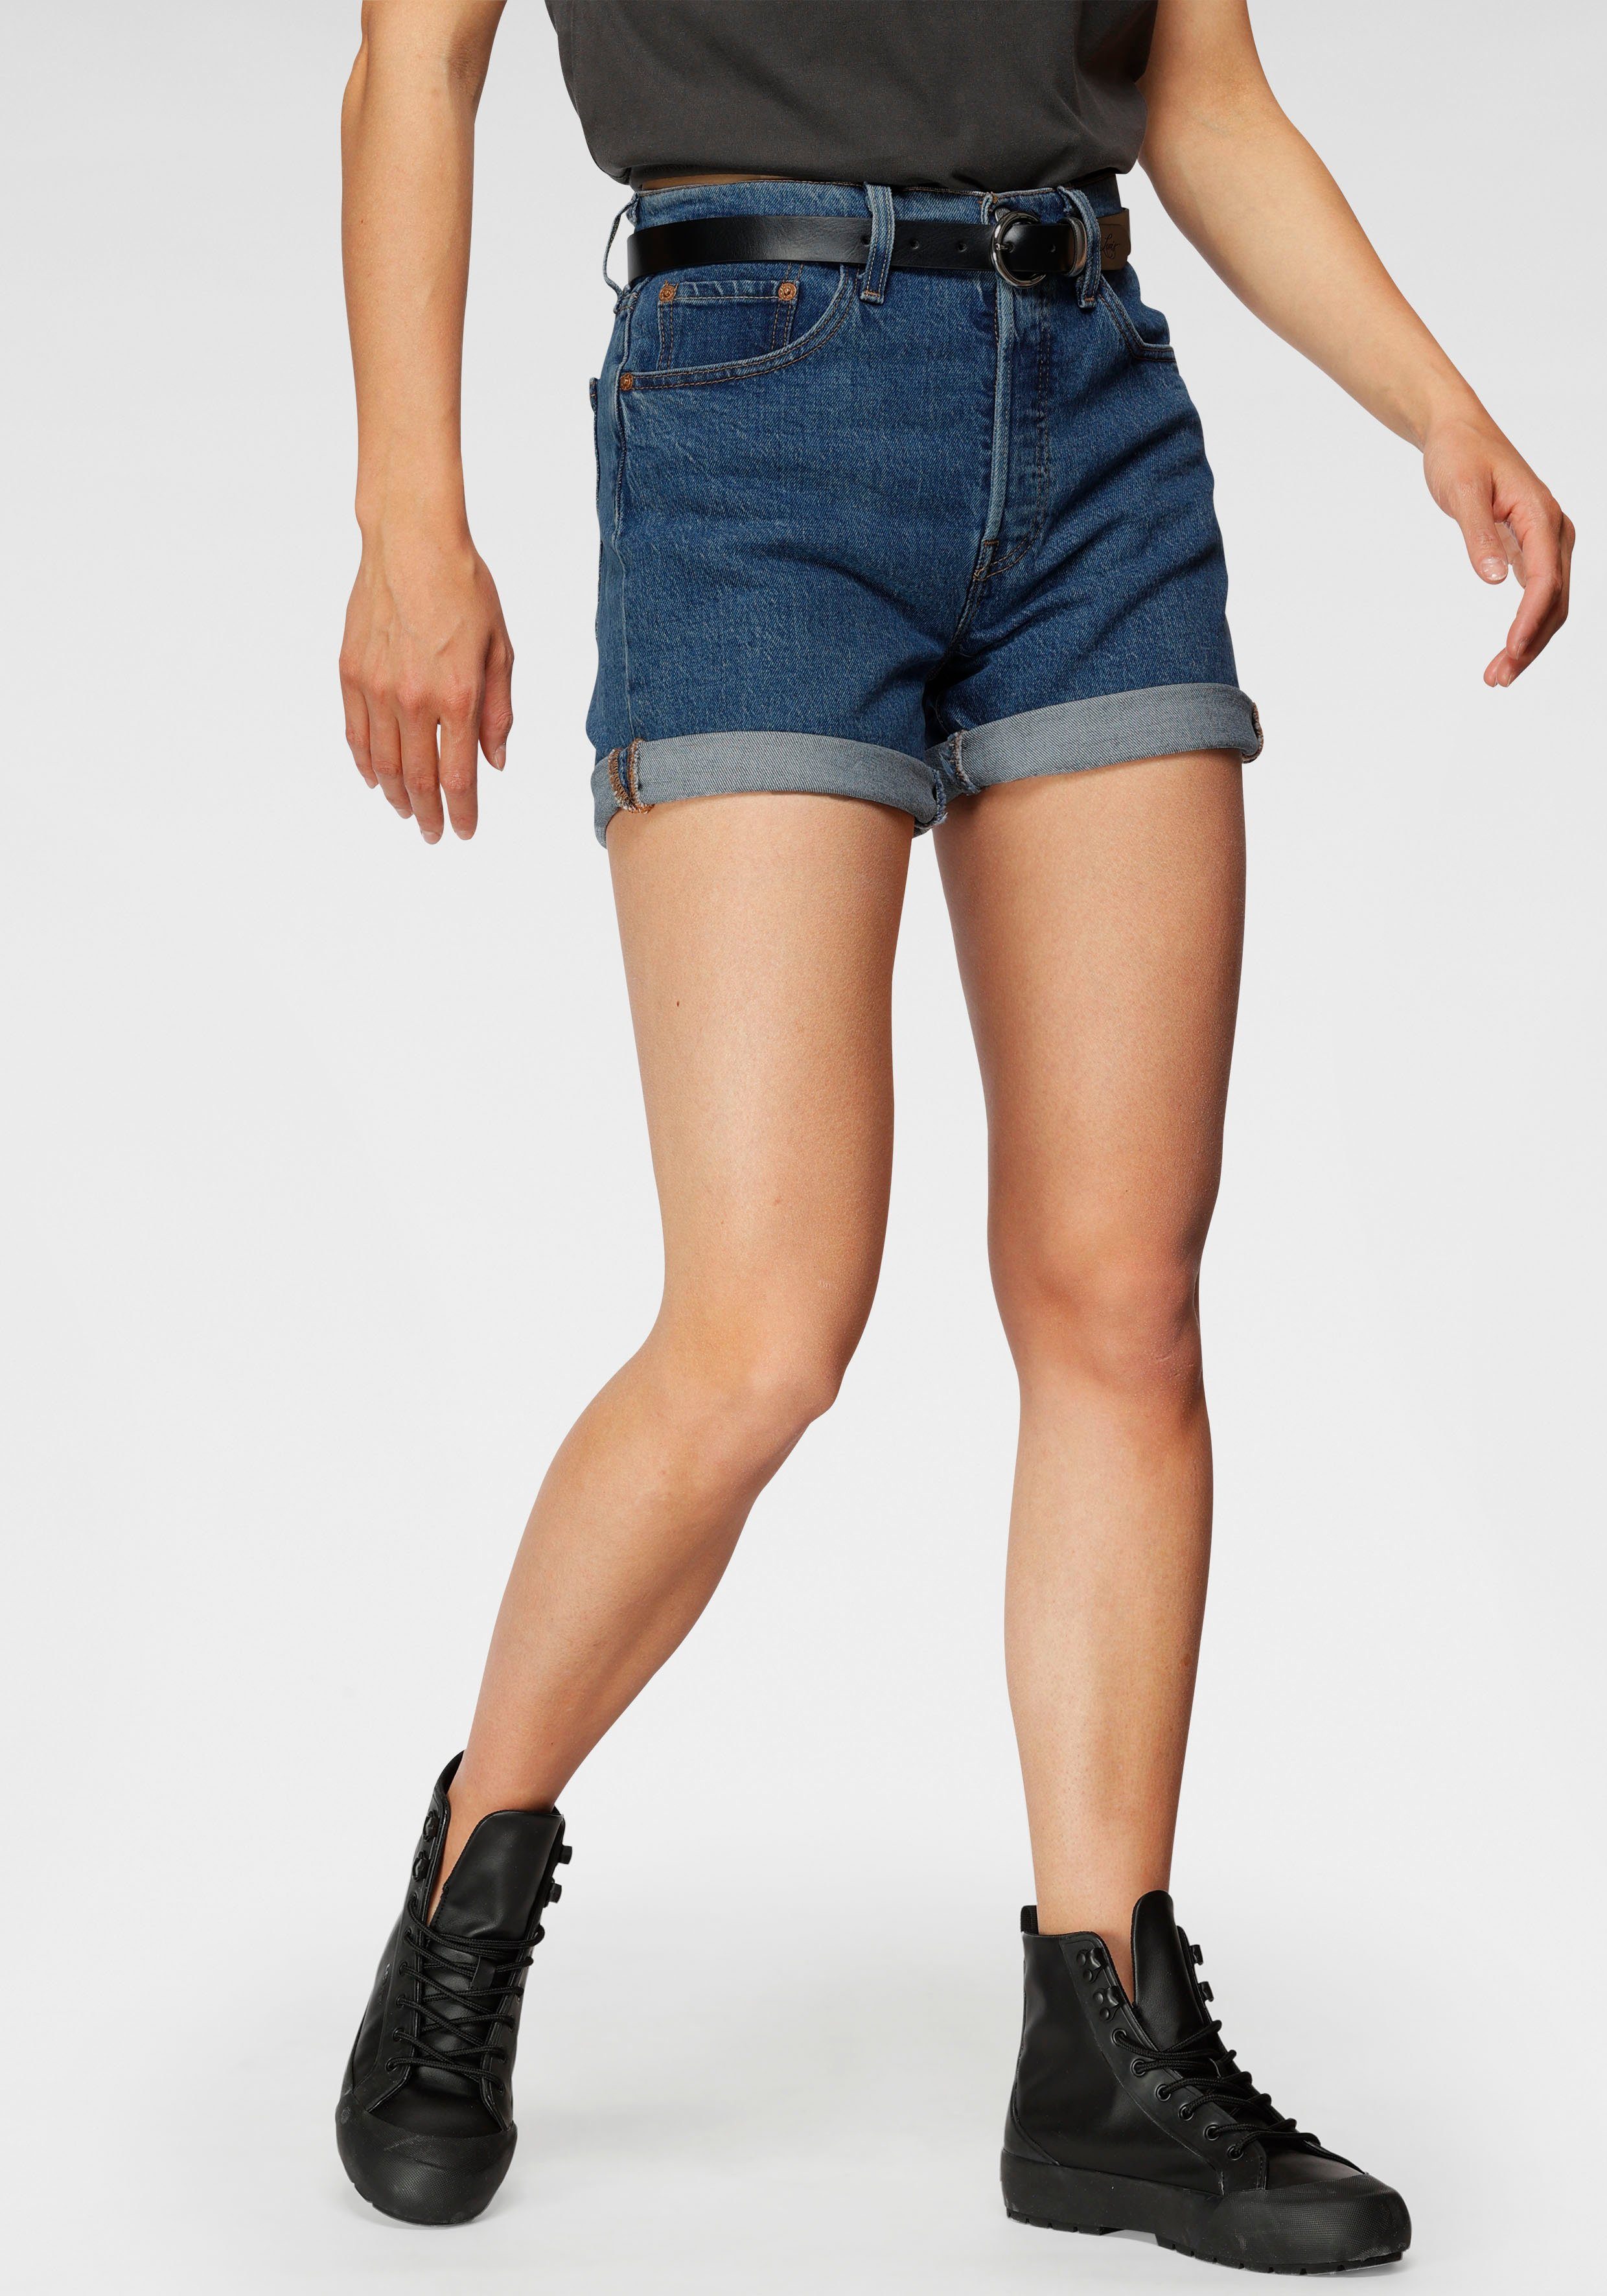 Levi's® Shorts 501 Mid Thigh Collection 501 Short